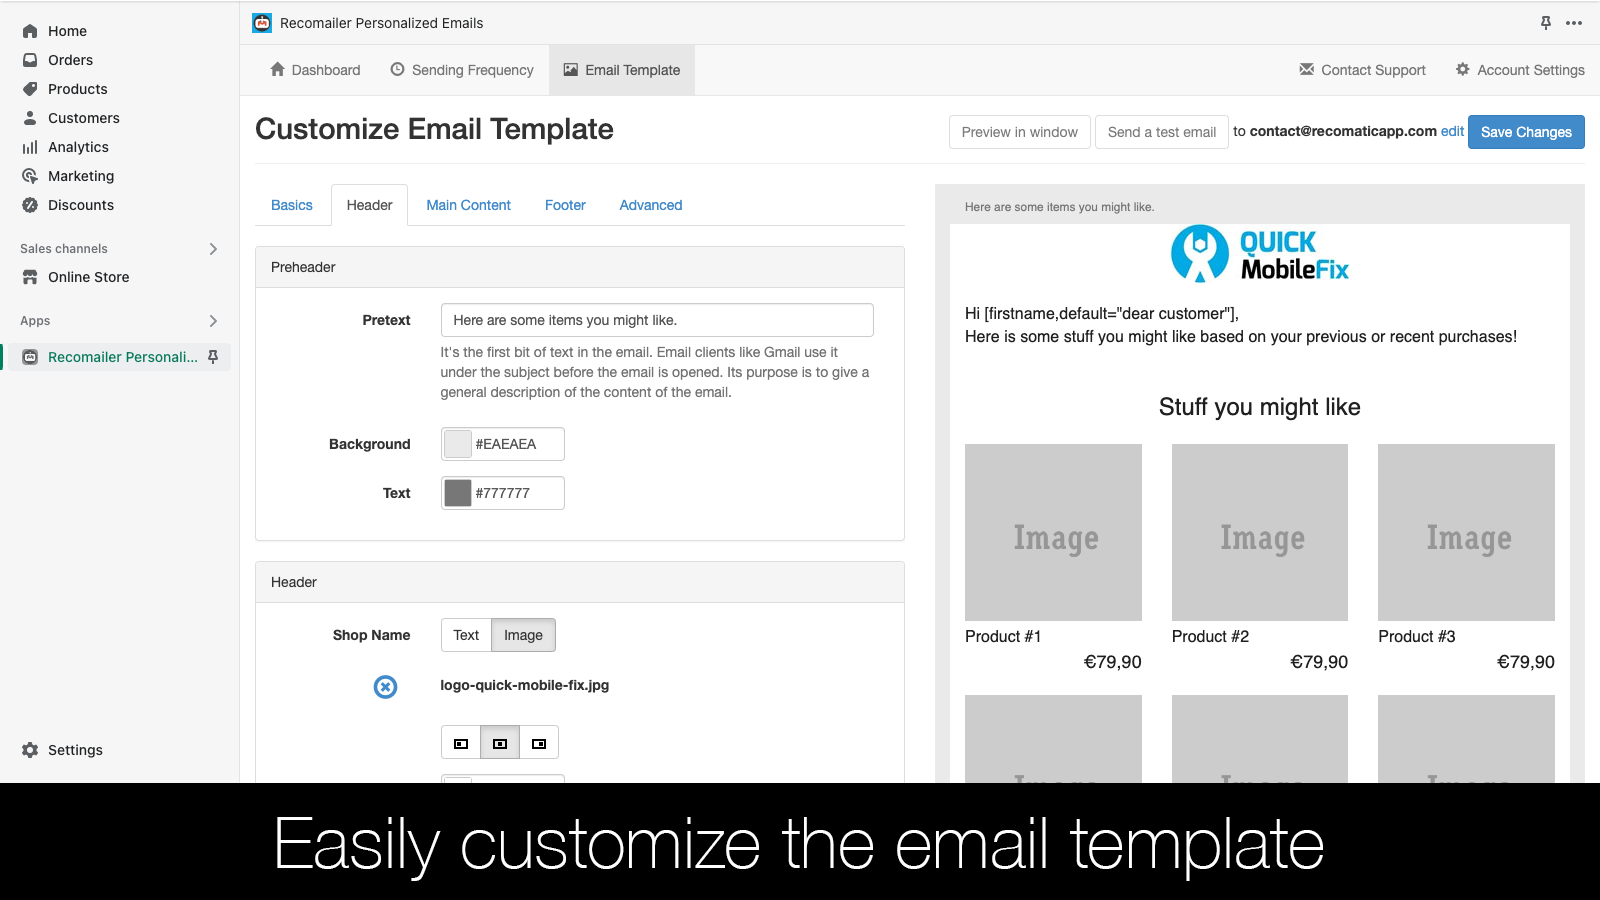 Easily customize the email template